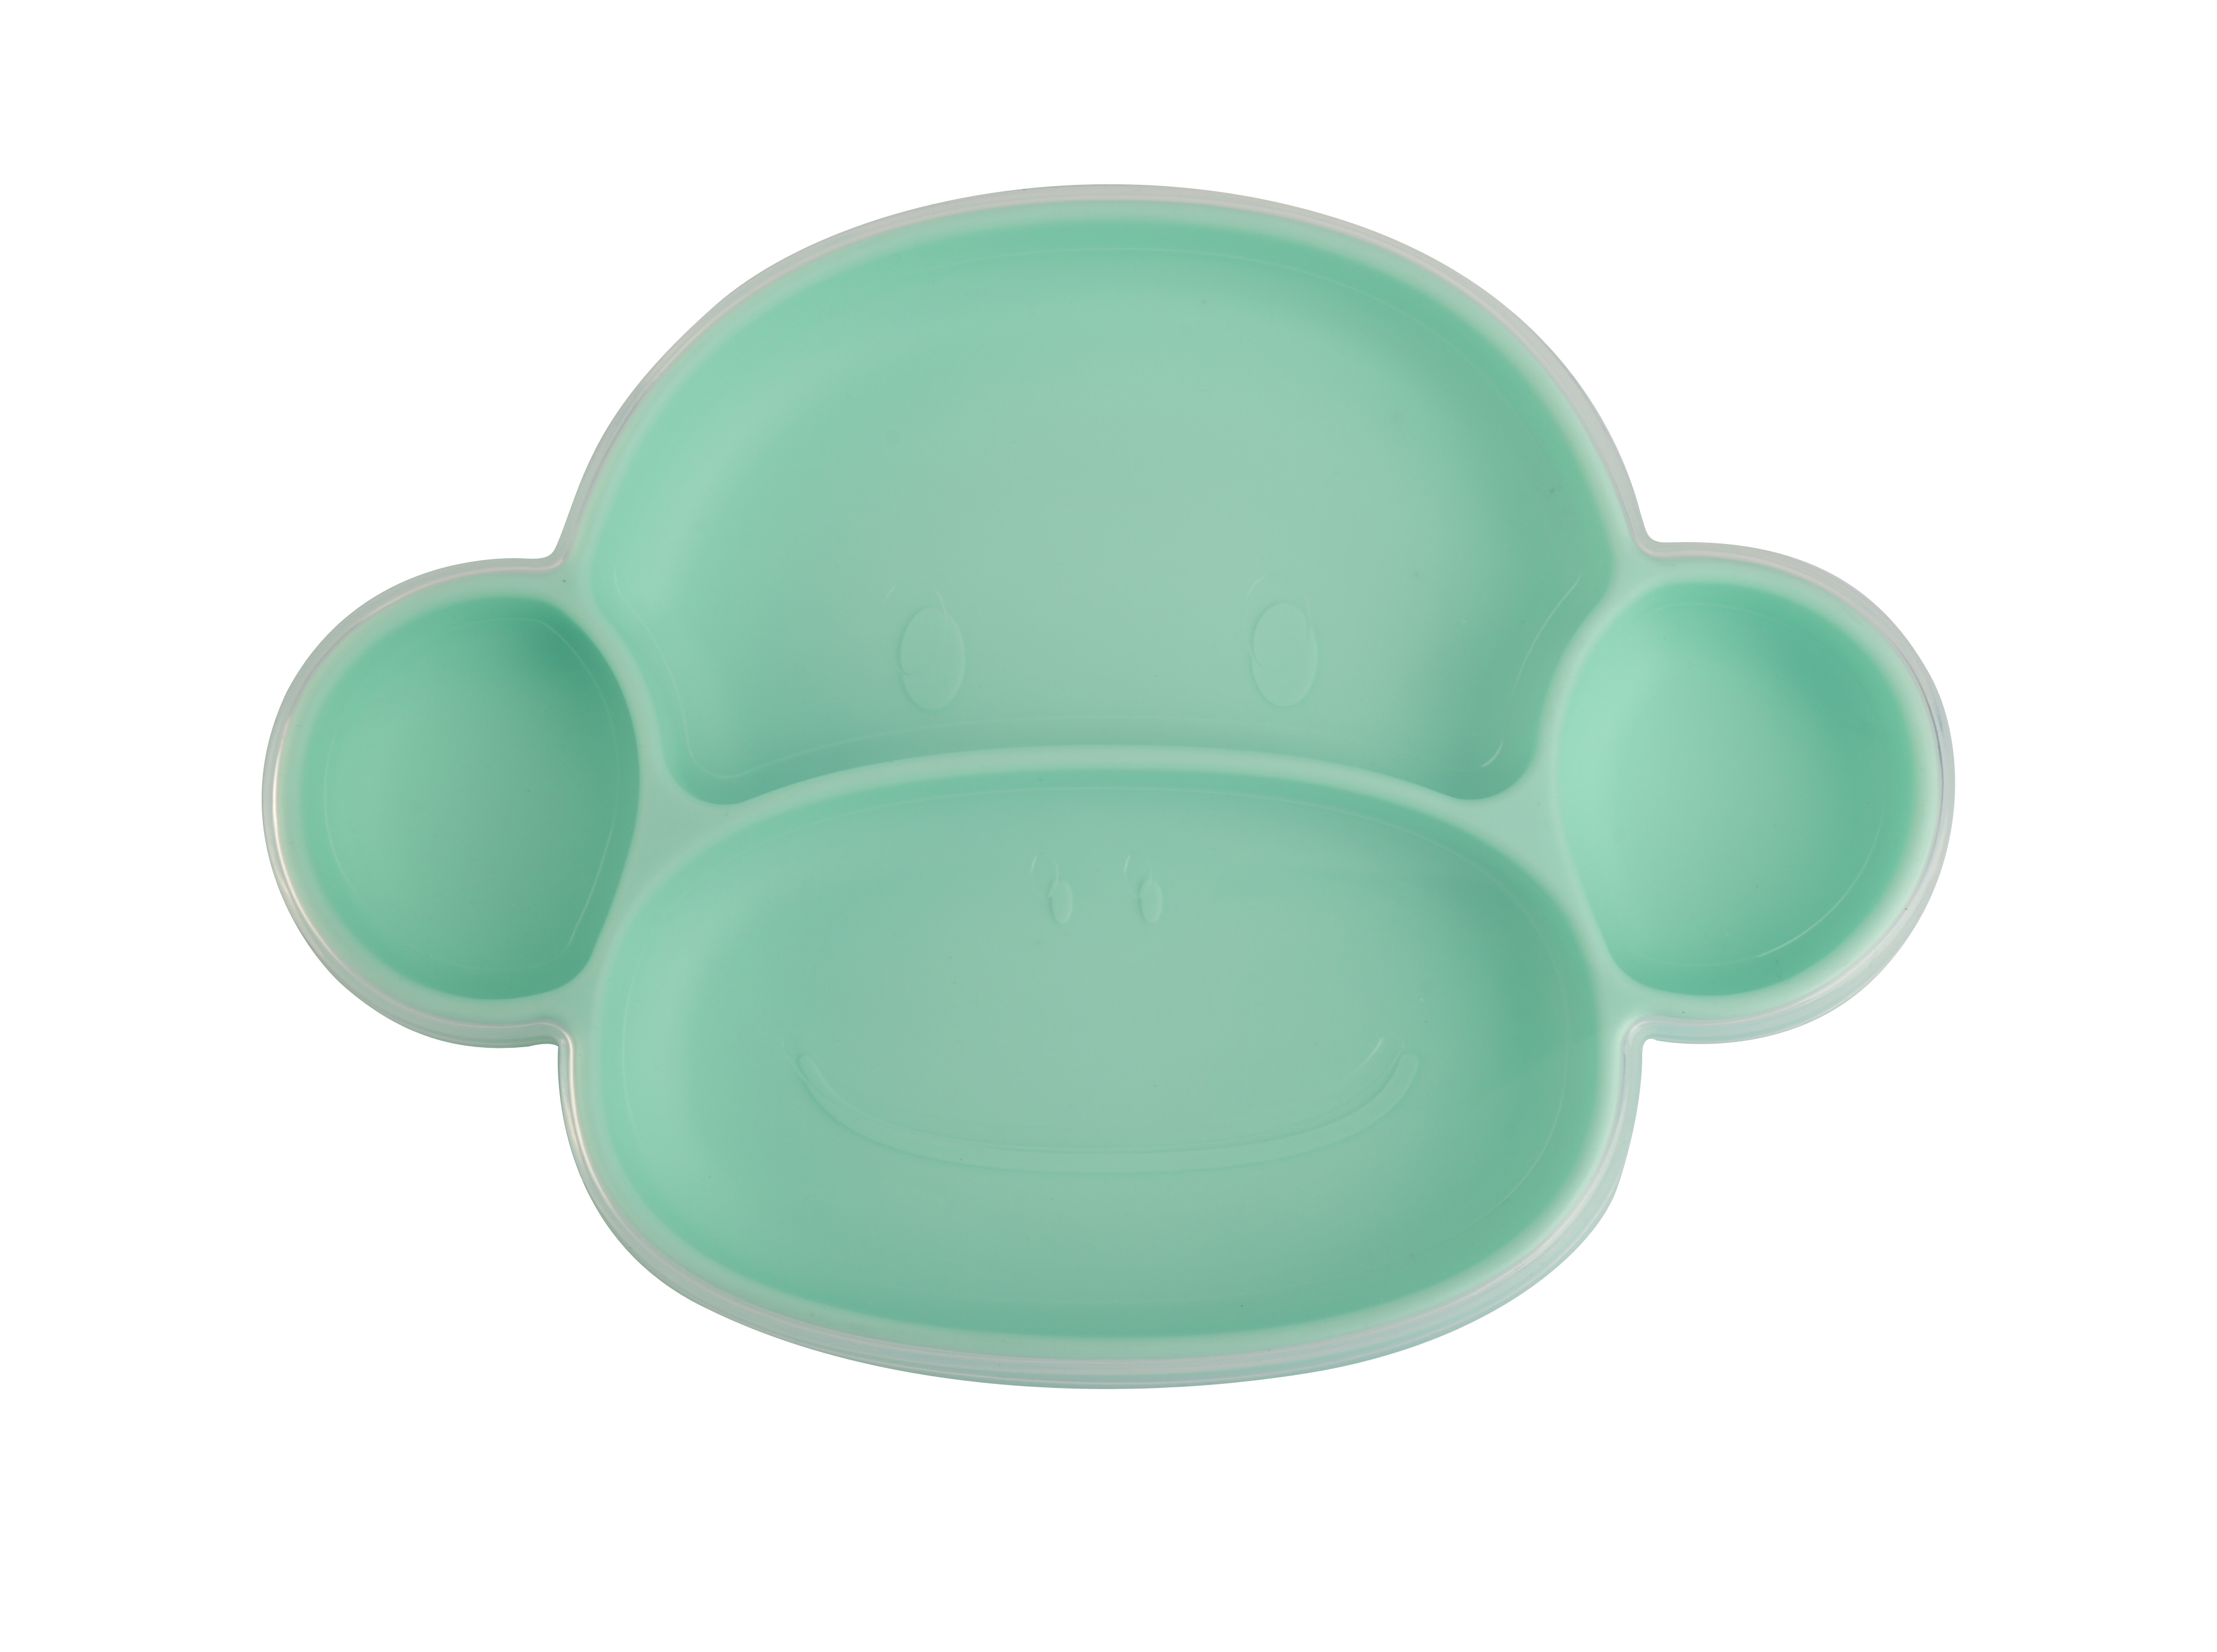 Monkey Shape Compartment Tray,silicone compartment tray